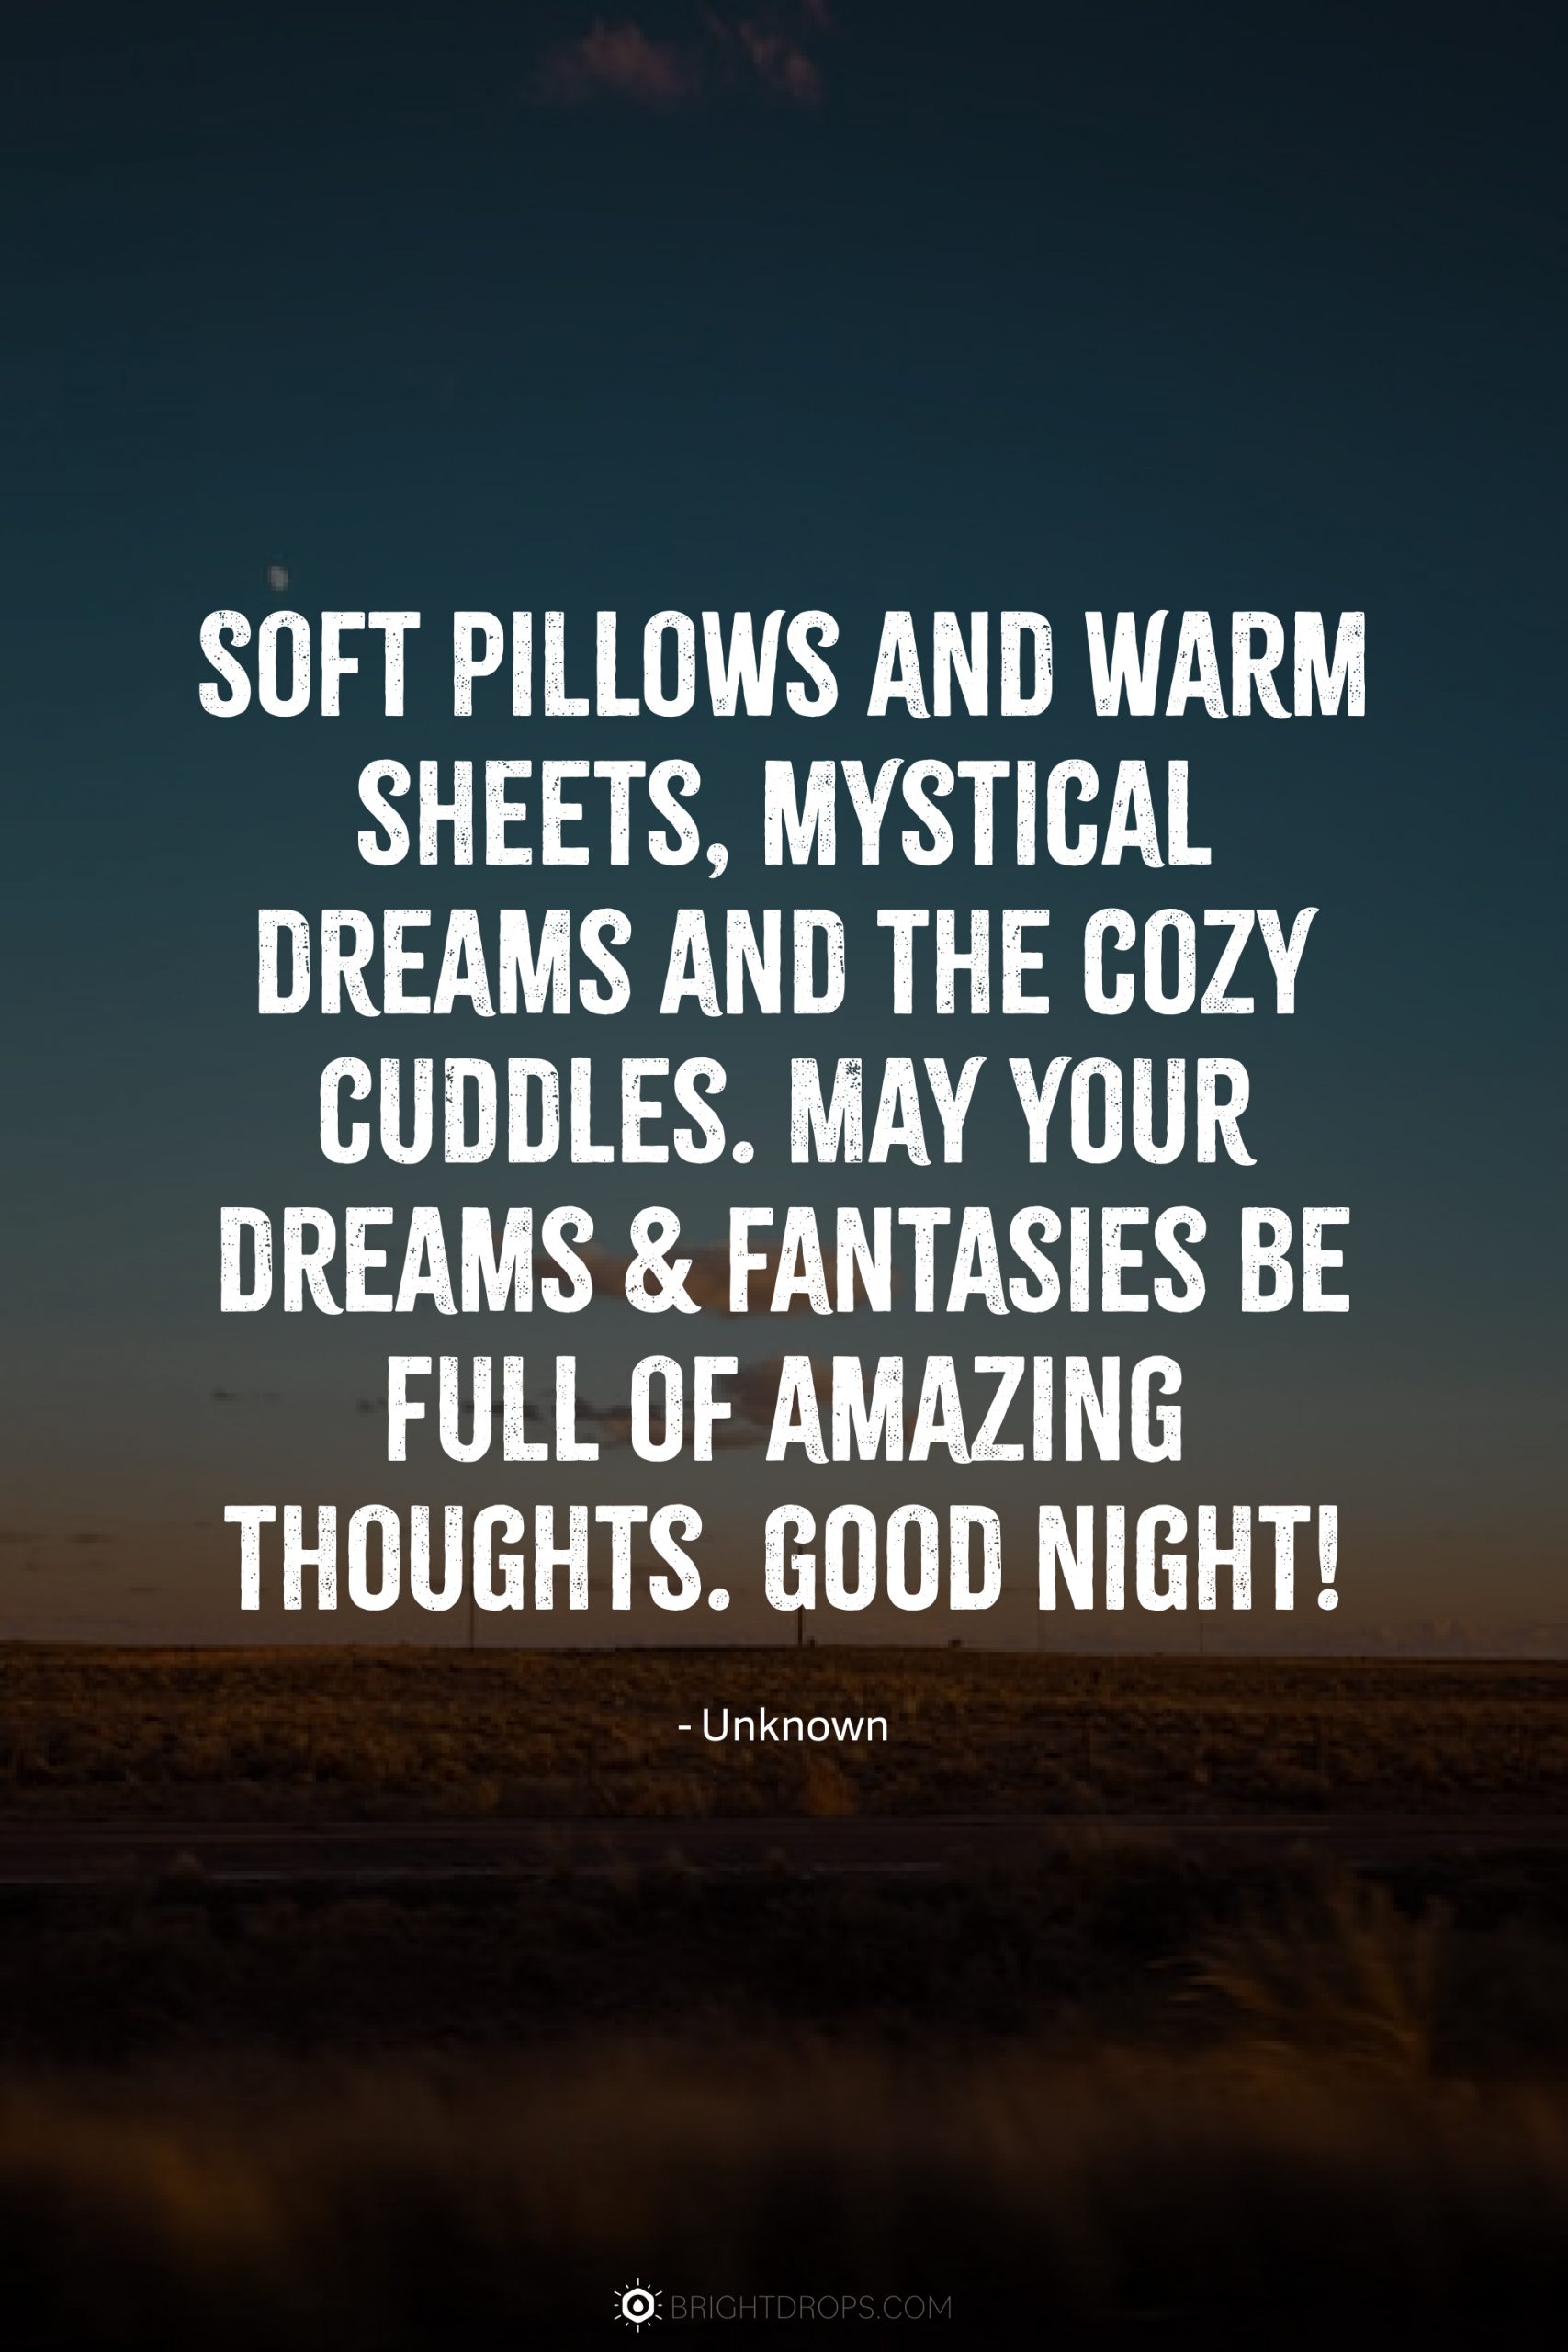 Soft pillows and warm sheets, mystical dreams and the cozy cuddles. May your dreams & fantasies be full of amazing thoughts. Good night!